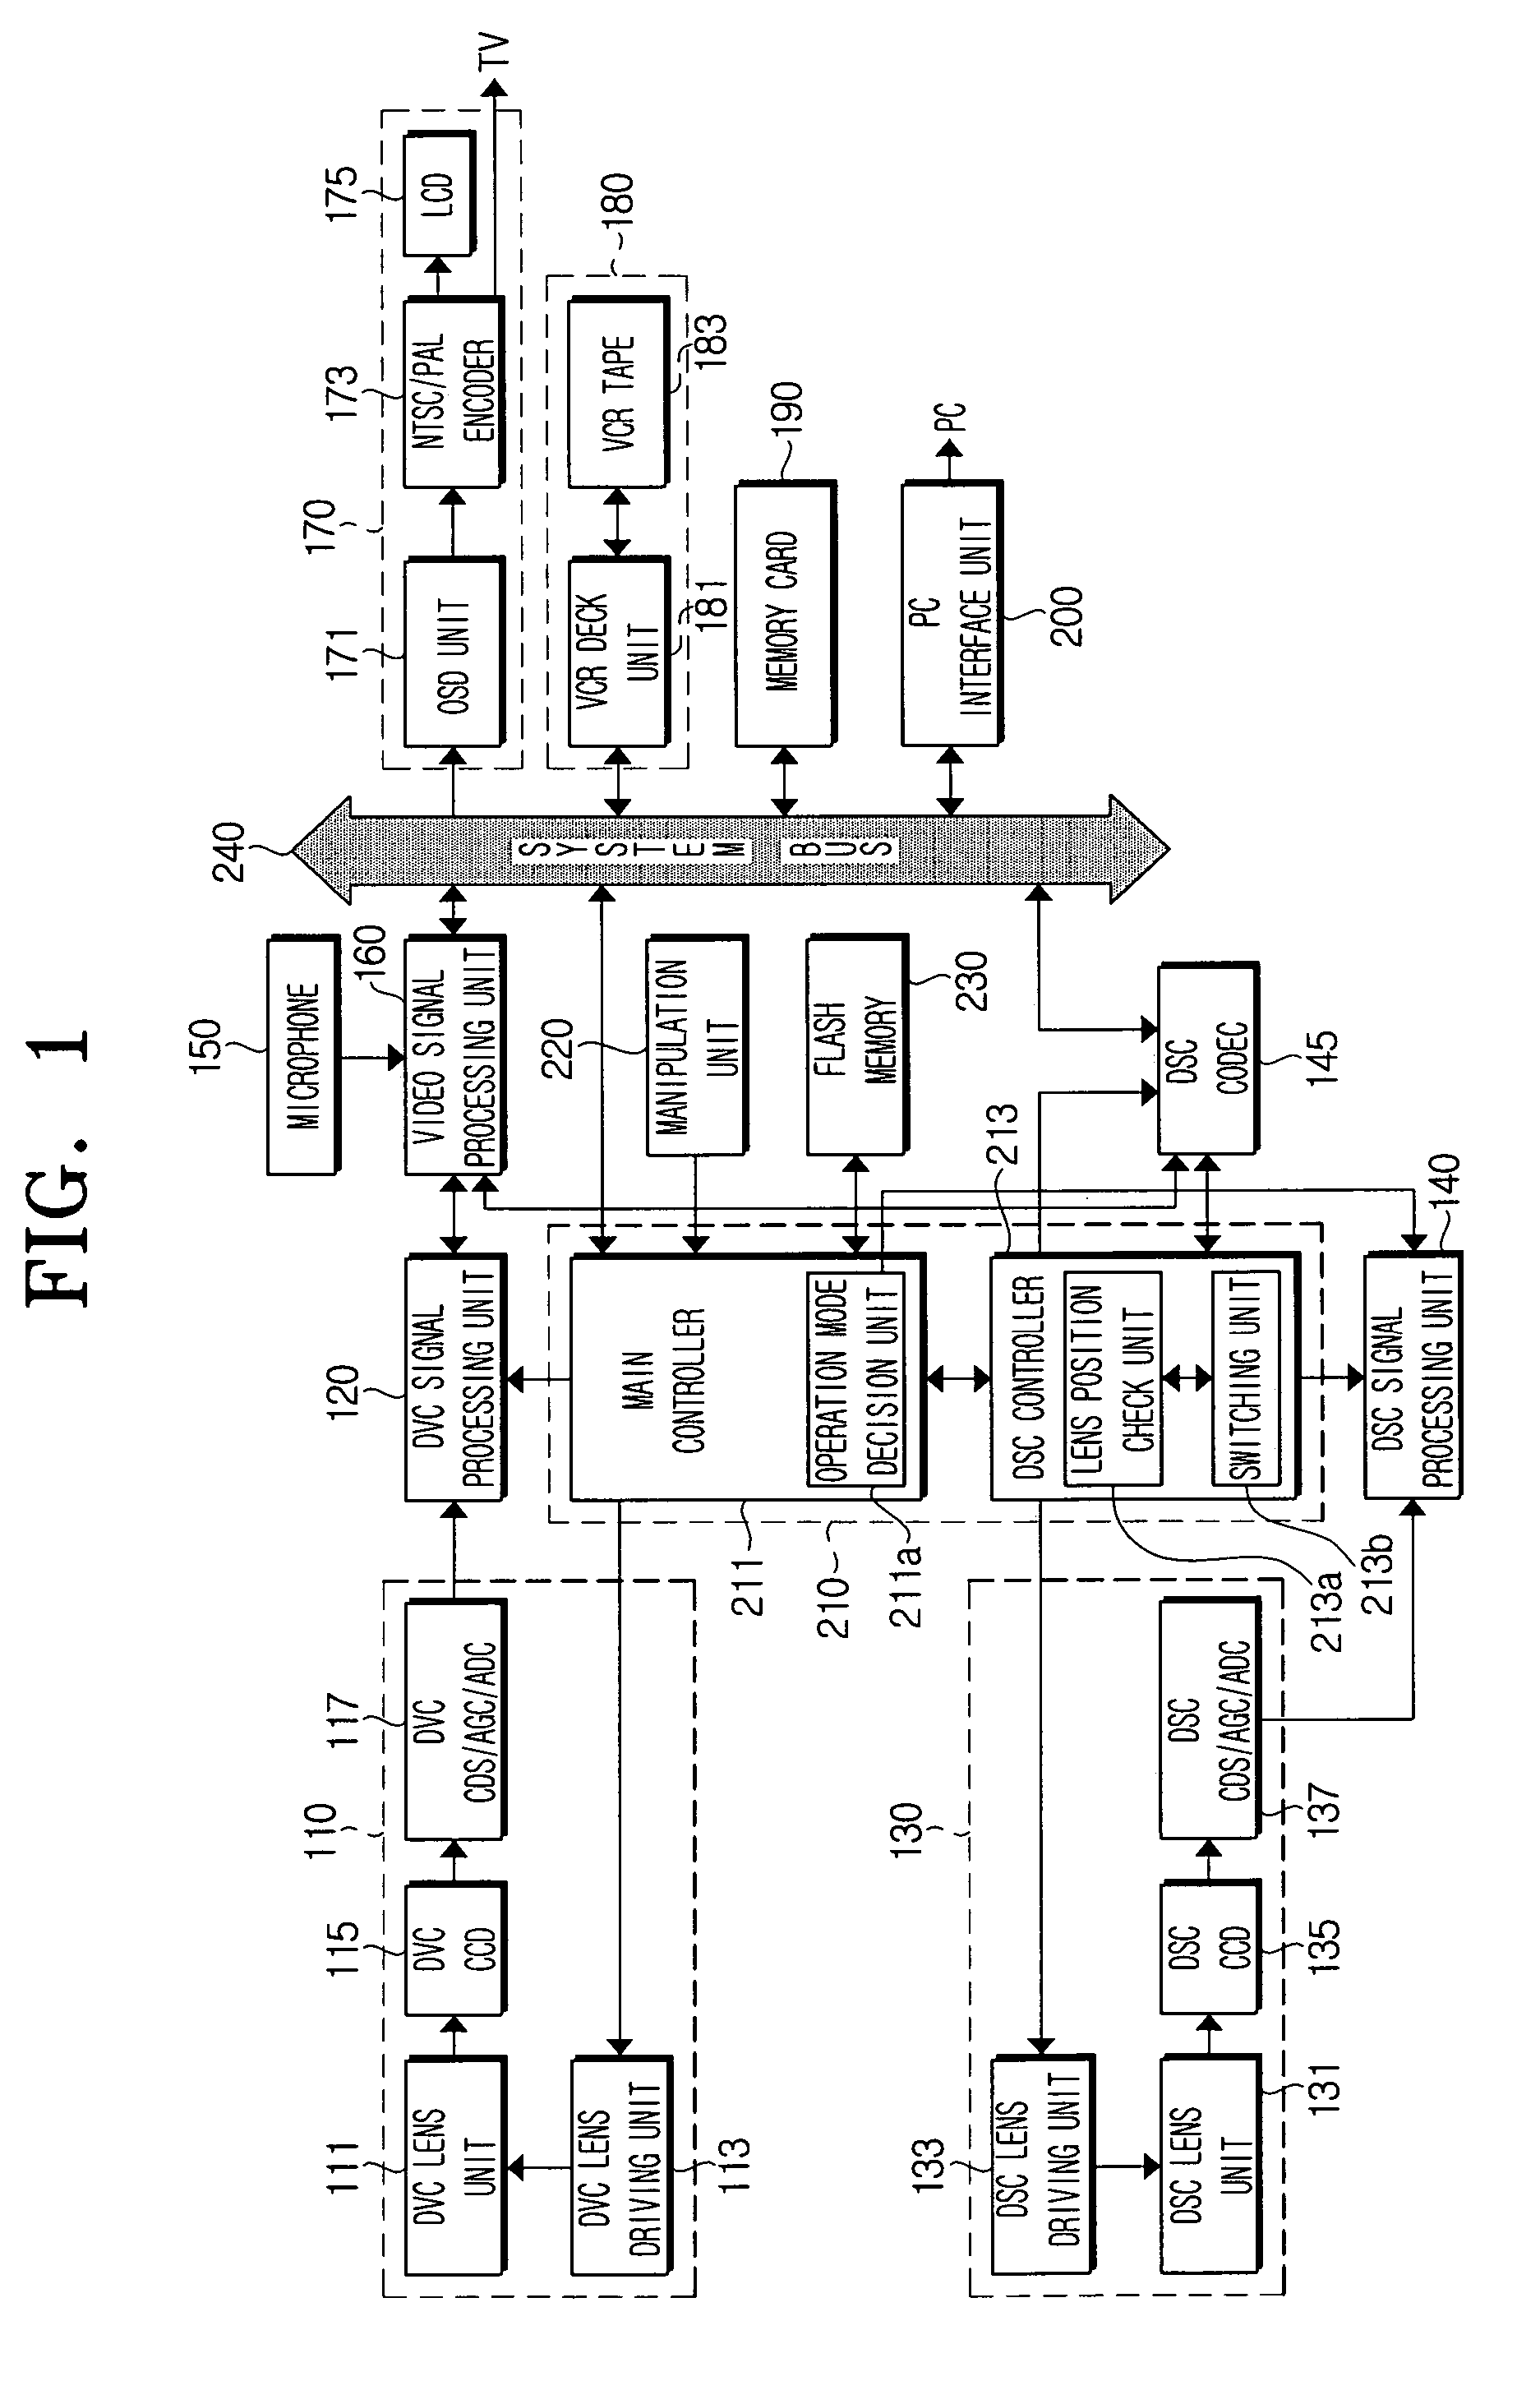 Combination camera and DSC lens control method using the same